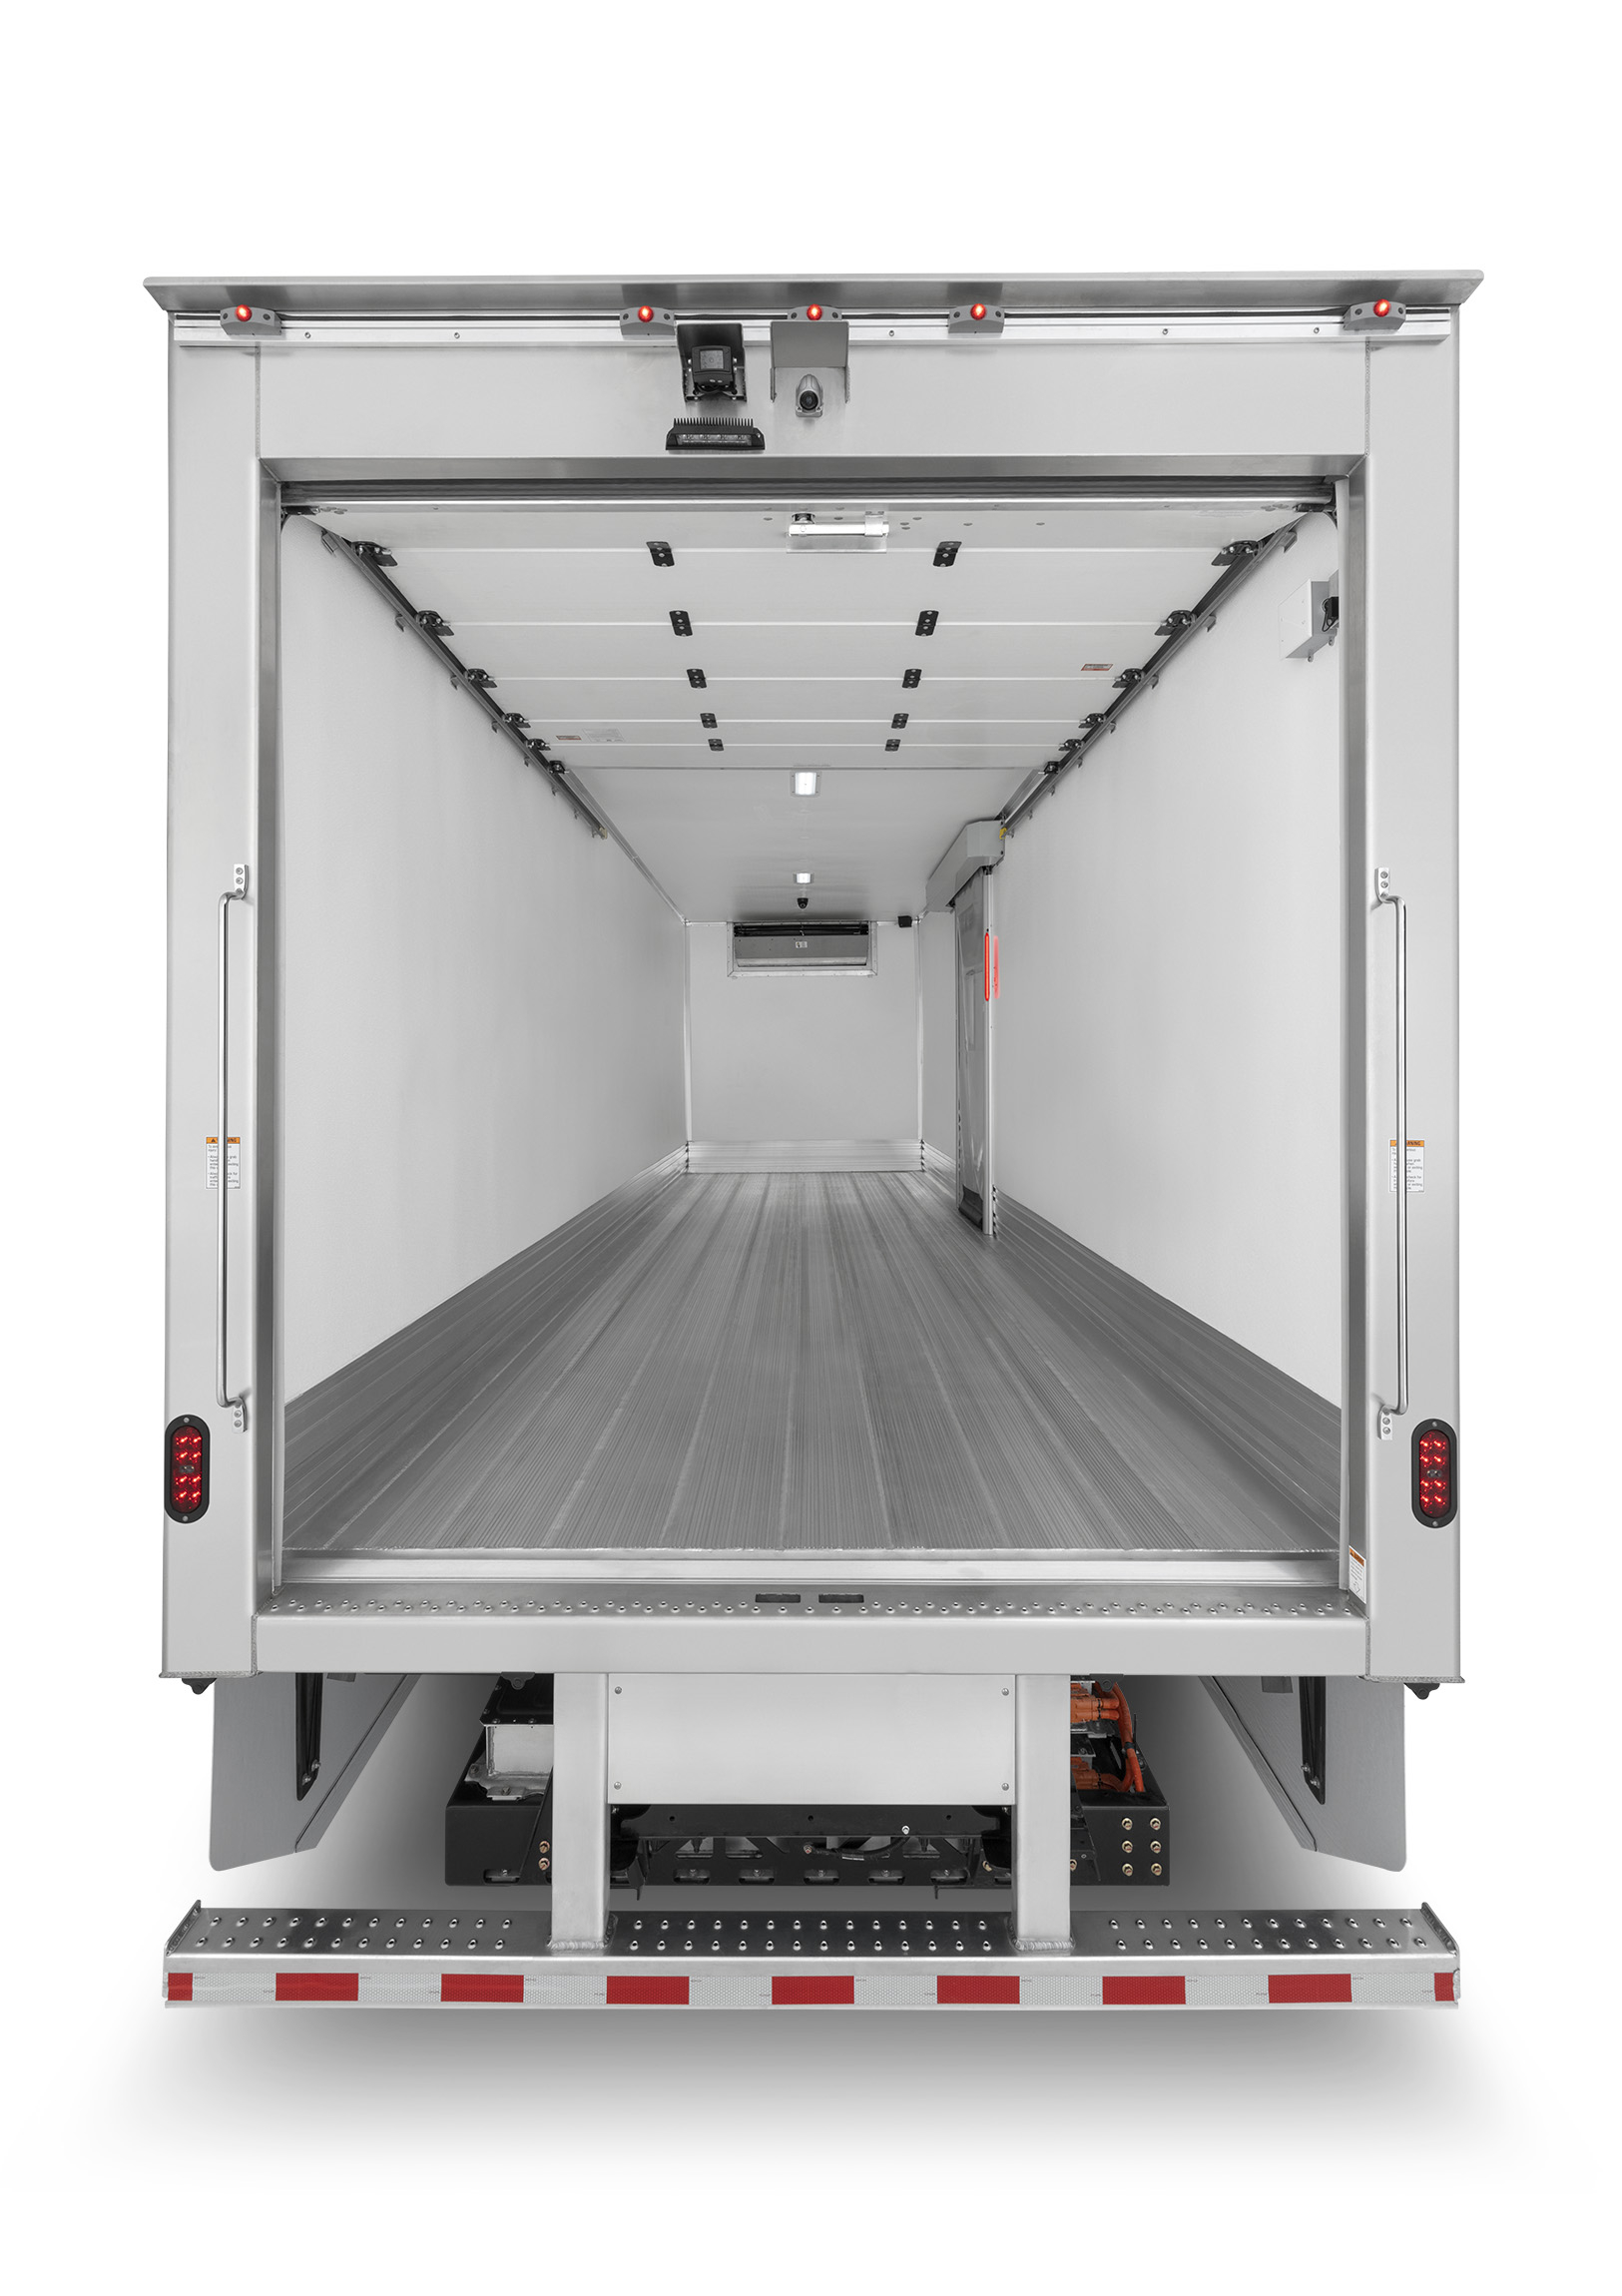 Morgan Truck Body Celebrates Its 70th Anniversary by Showcasing Electrified Truck  Refrigerated Concept Body at Work Truck Week 2022 | Business Wire